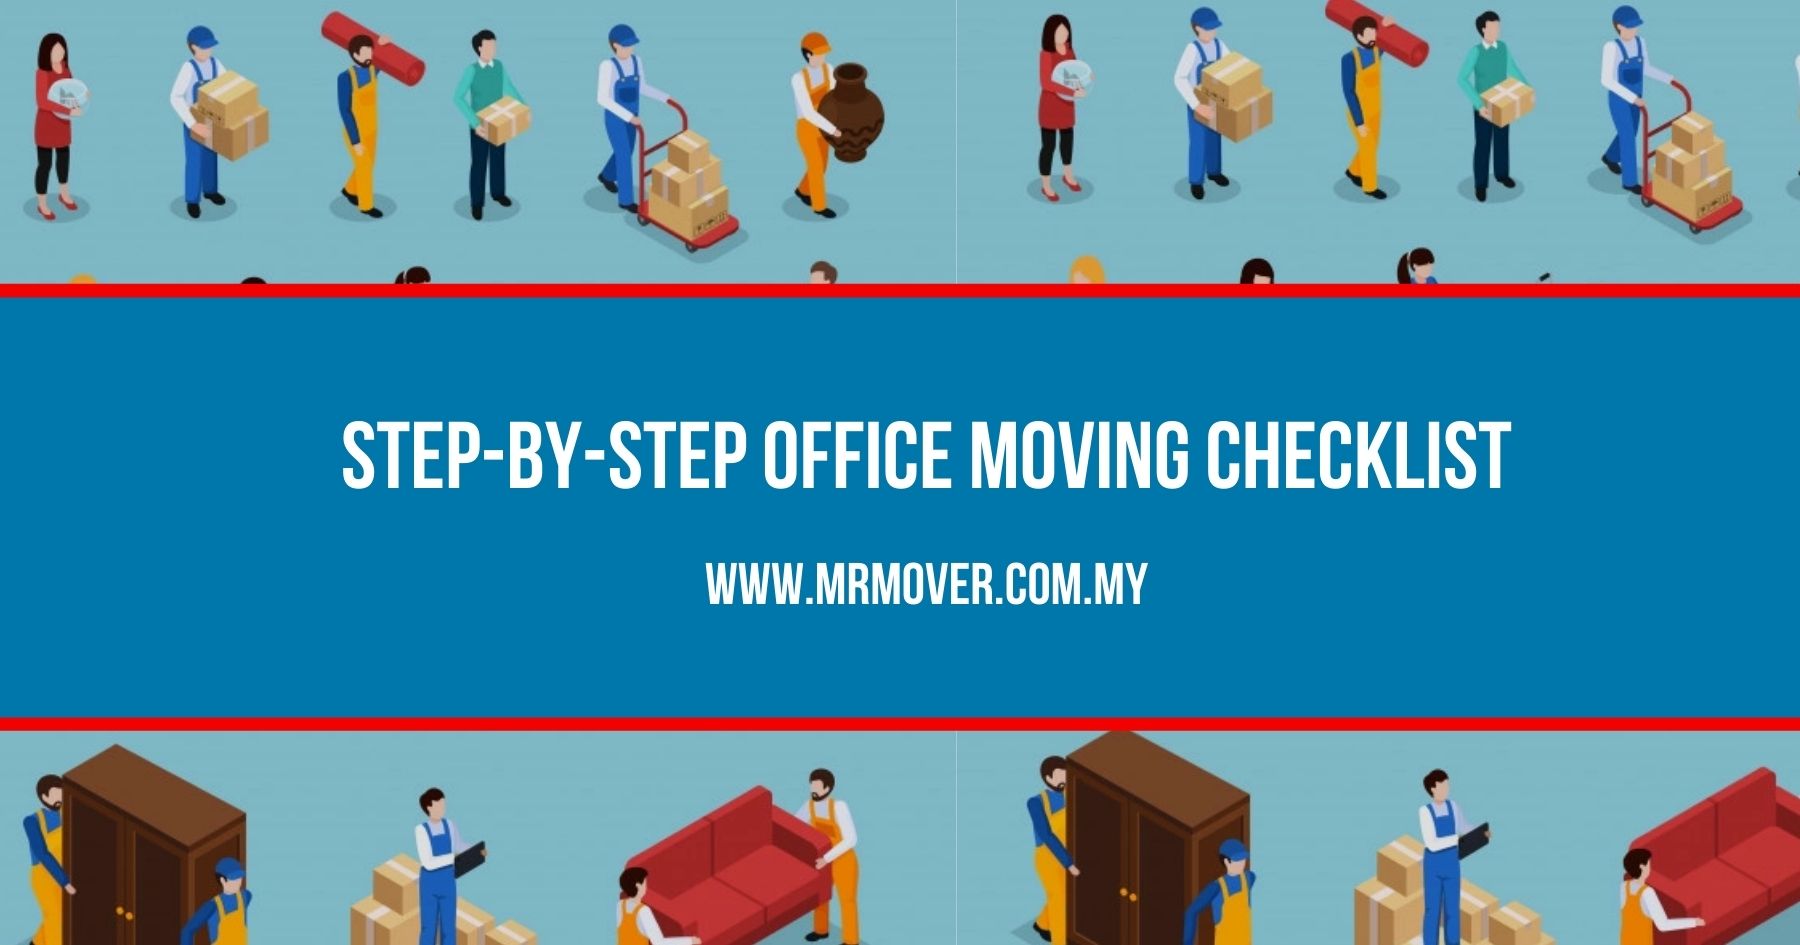 Step-by-Step Office Moving Checklist